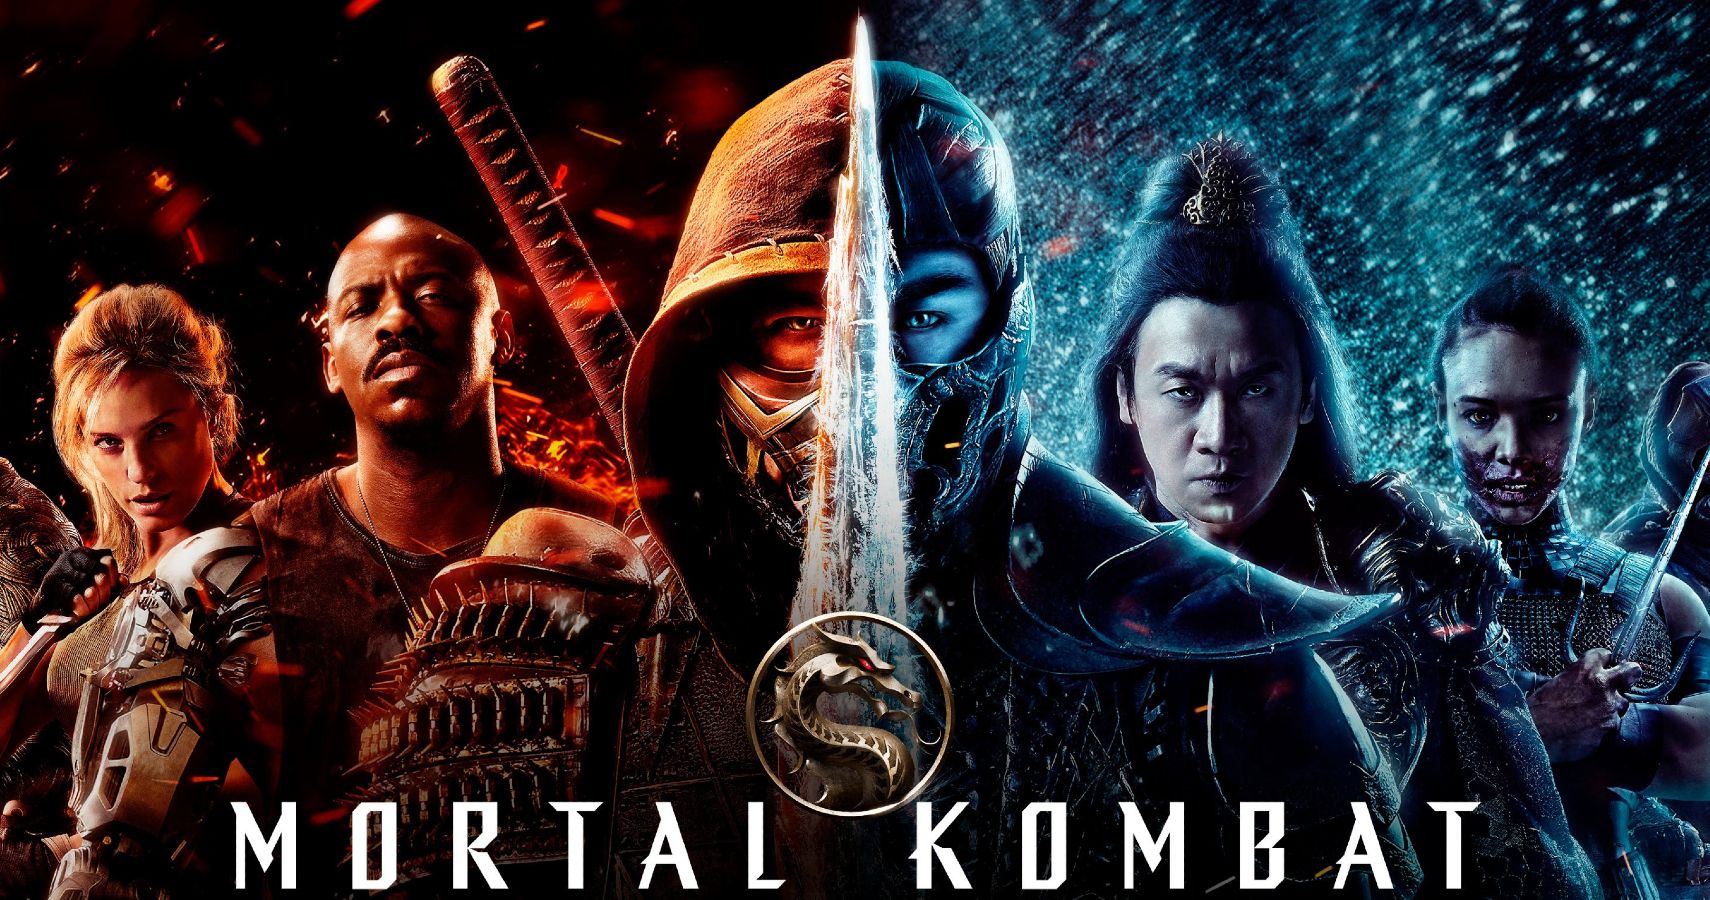 Official Poster for the movie Mortal Kombat